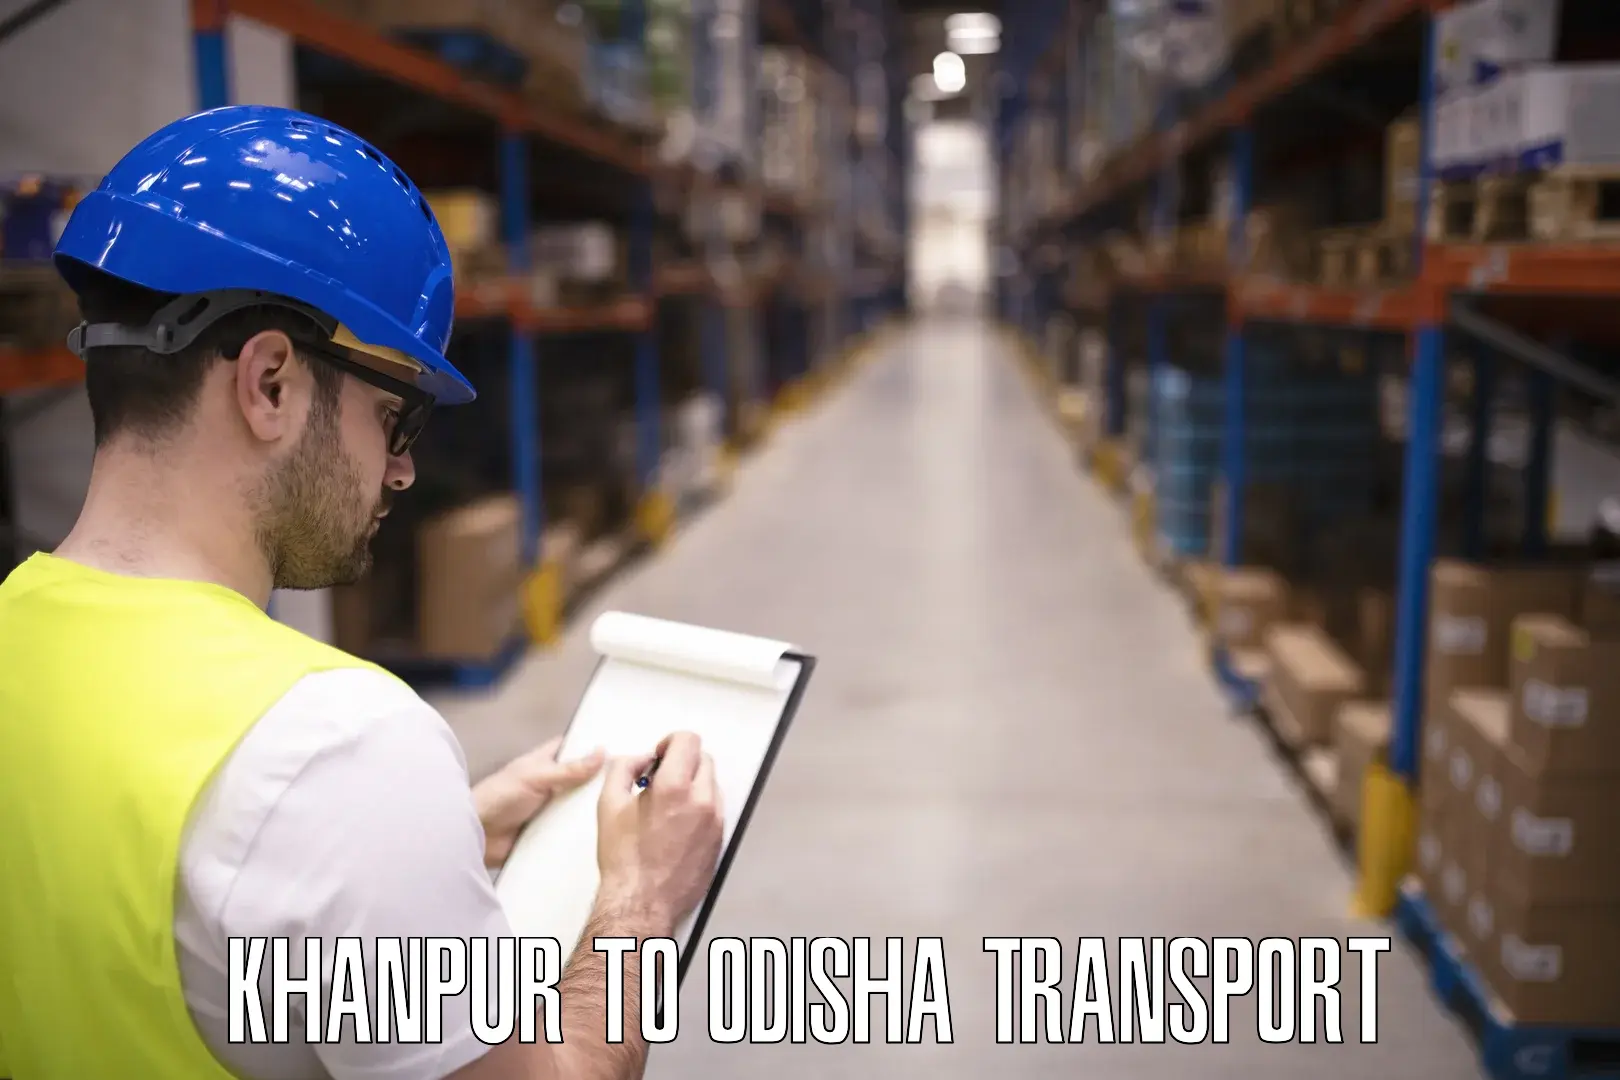 Parcel transport services in Khanpur to Odisha